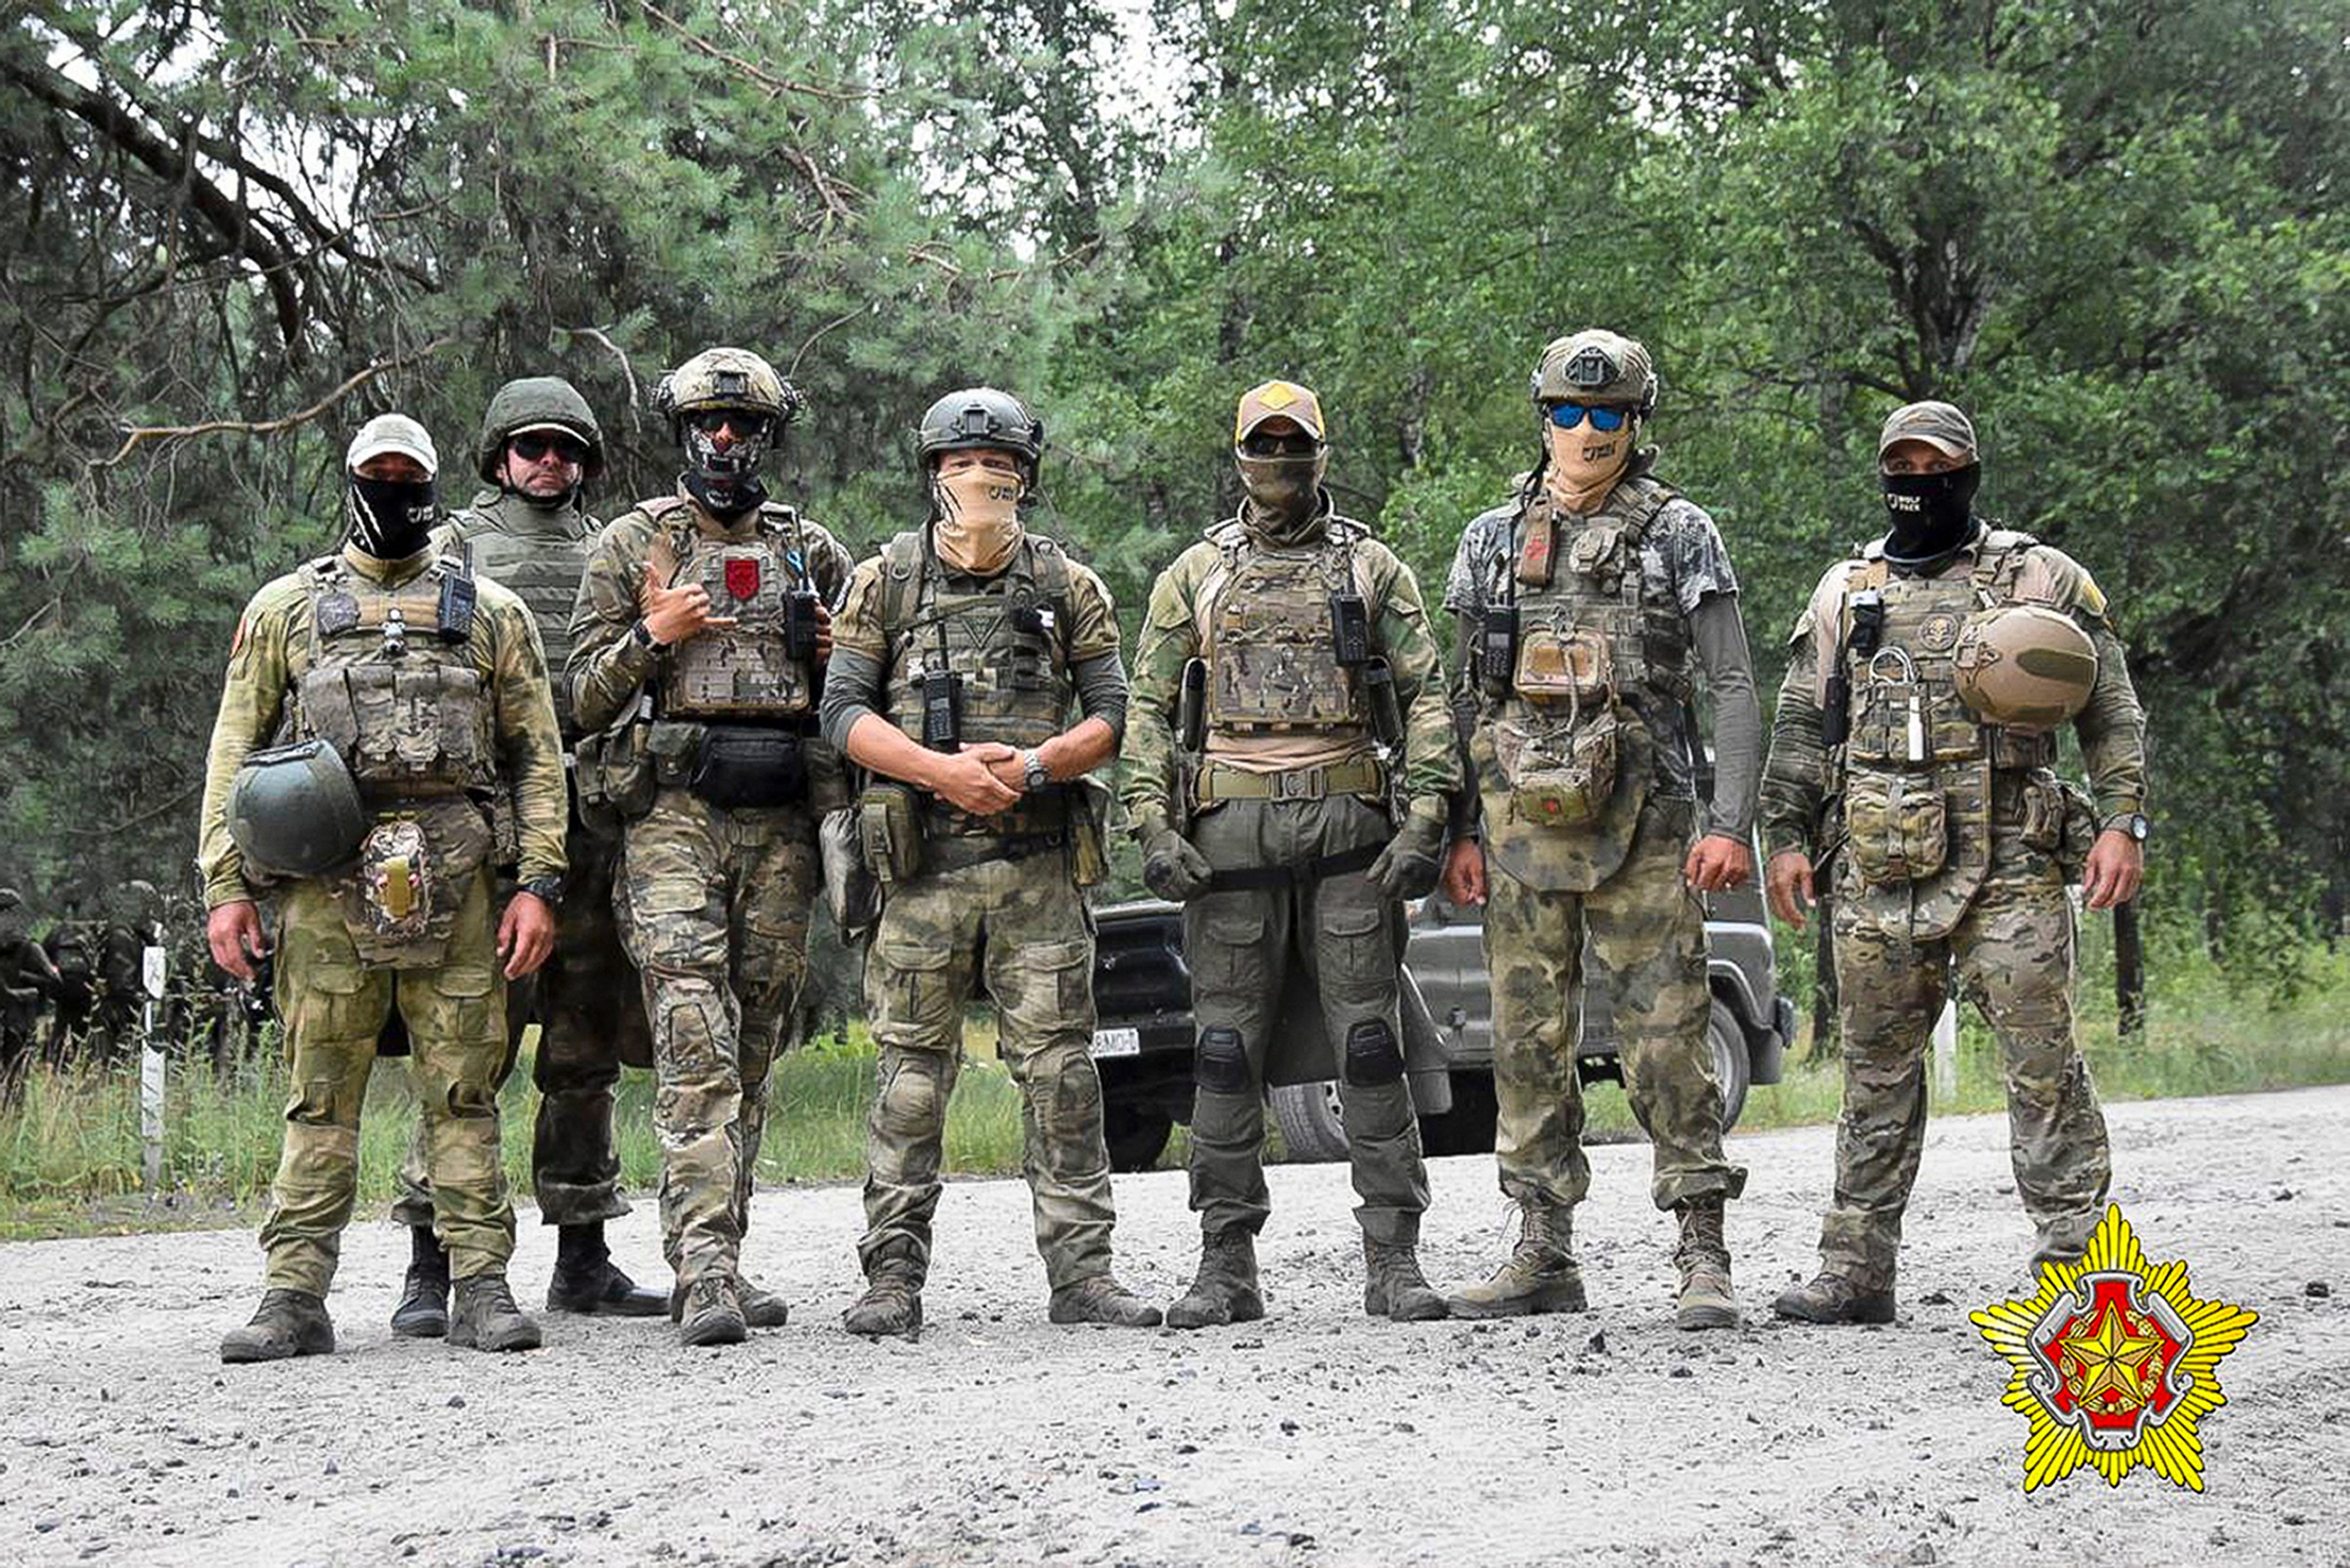 Belarusian soldiers and Wagner mercenary fighters pose for a photo at a firing range near the border city of Brest, Belarus. Photo: Belarus Defence Ministry via AP